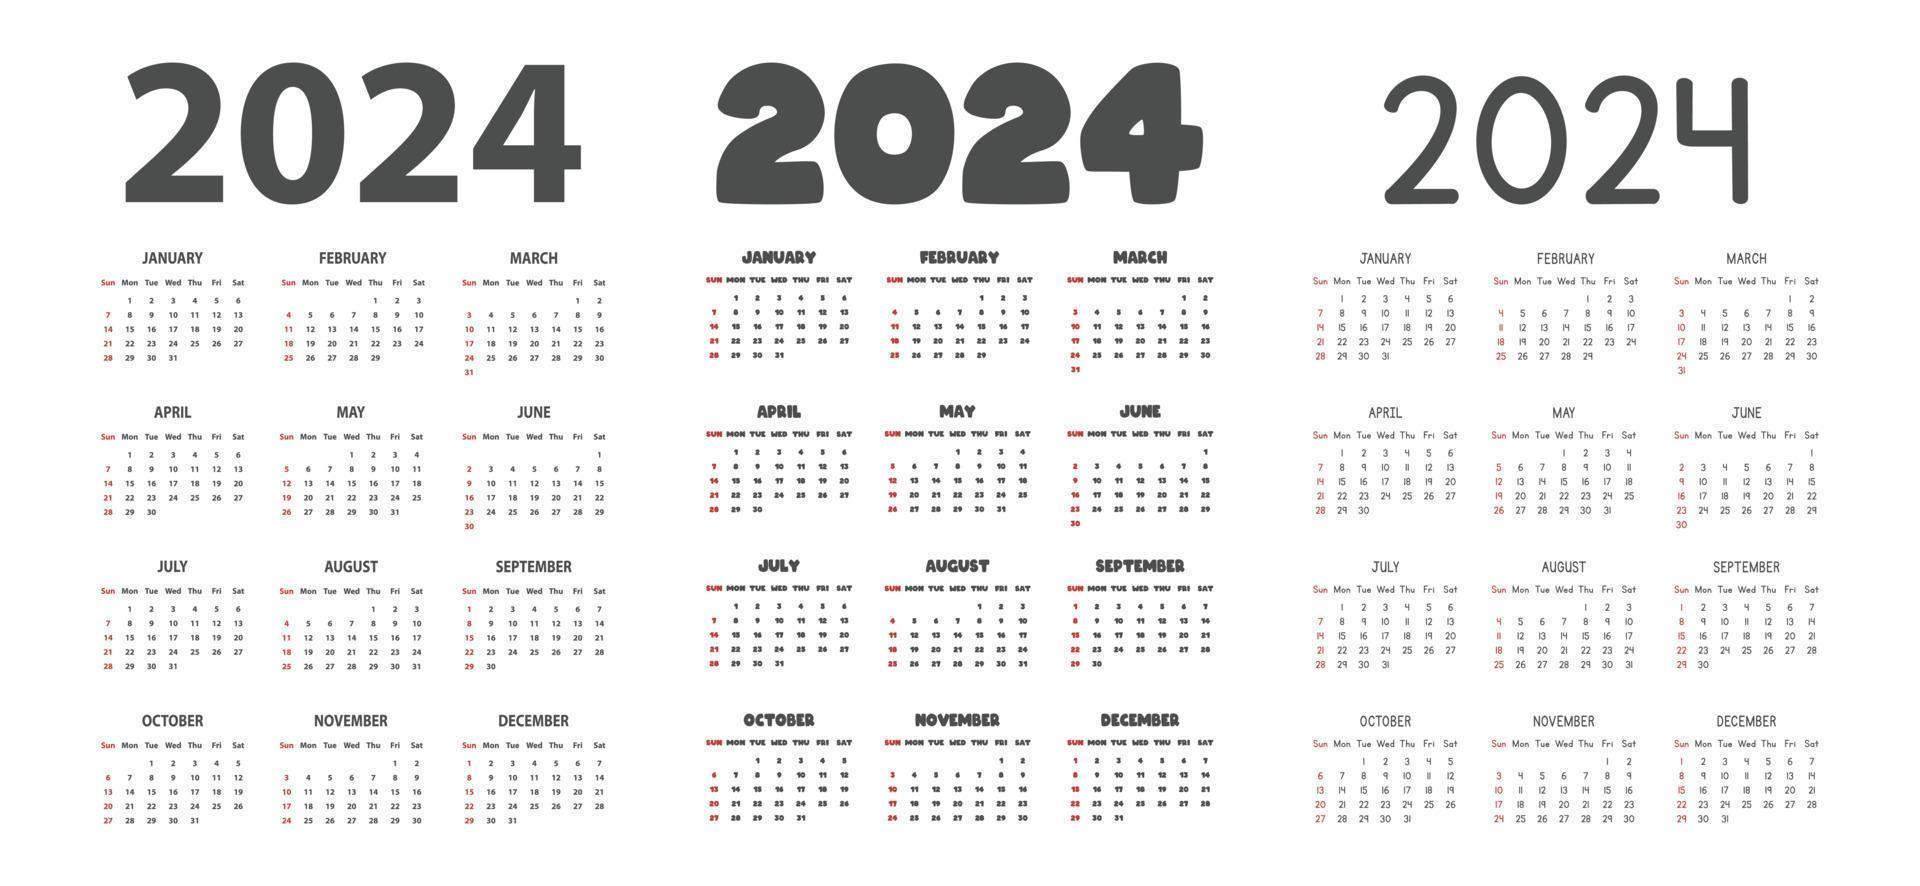 2024 calendar in different fonts style vector illustration. Simple